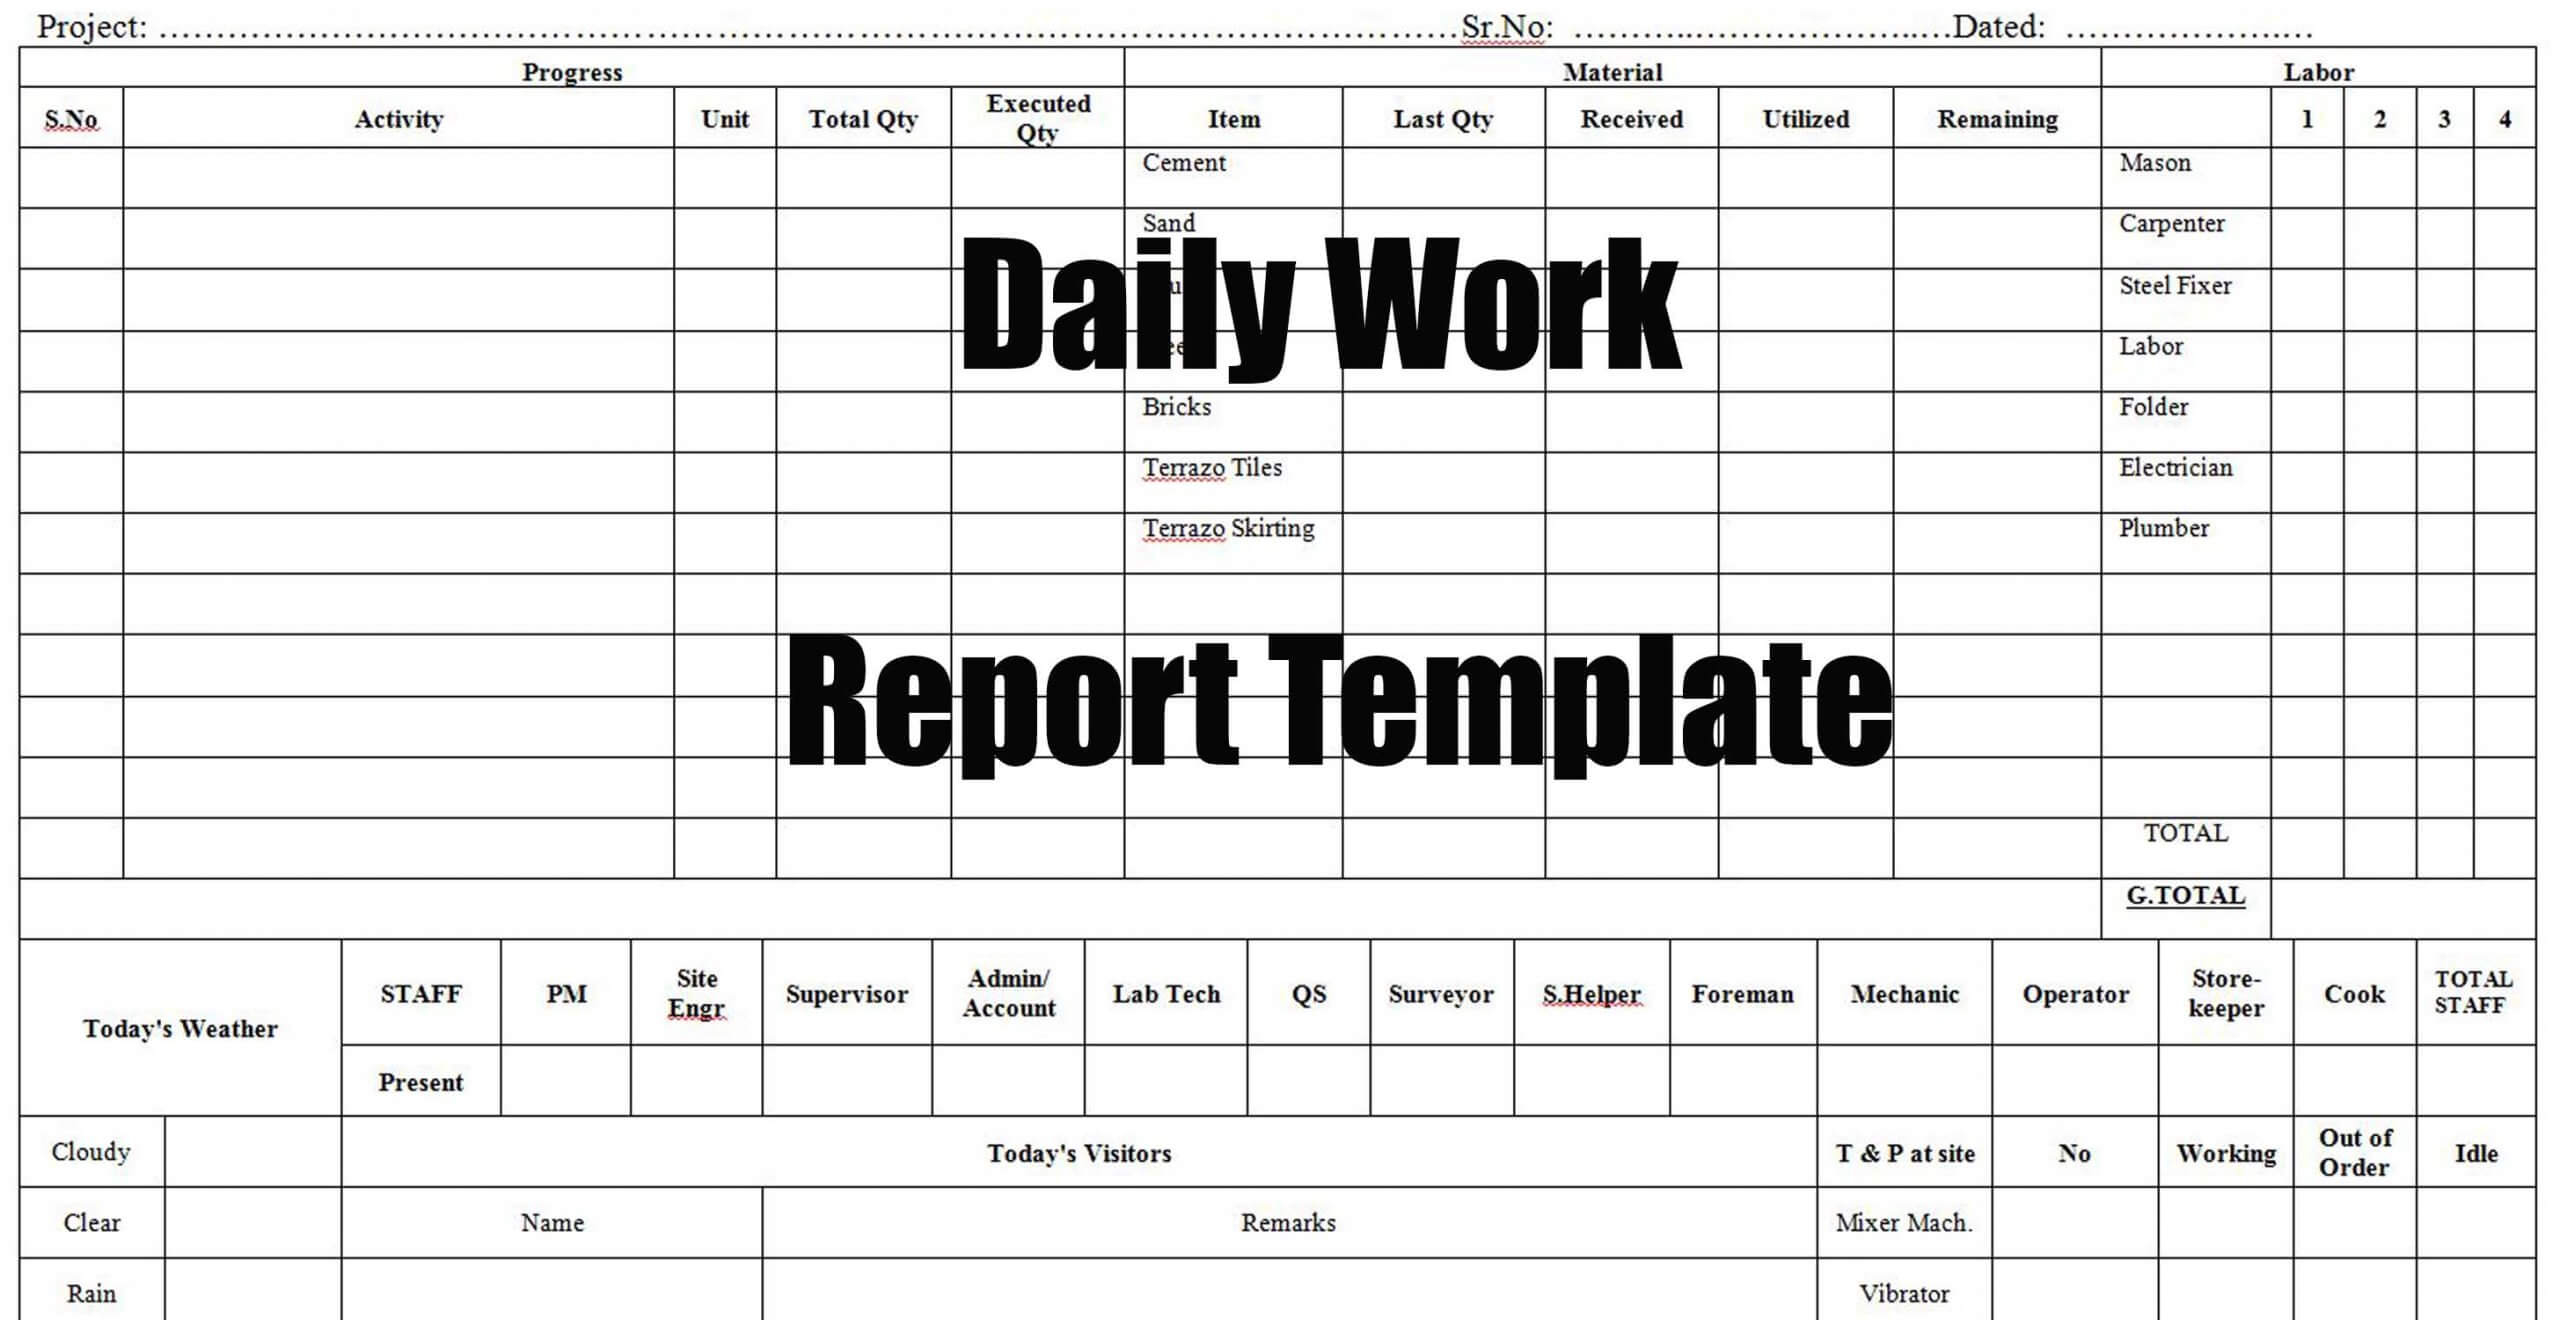 Daily Work Report Template - Engineering Discoveries With Regard To Daily Work Report Template